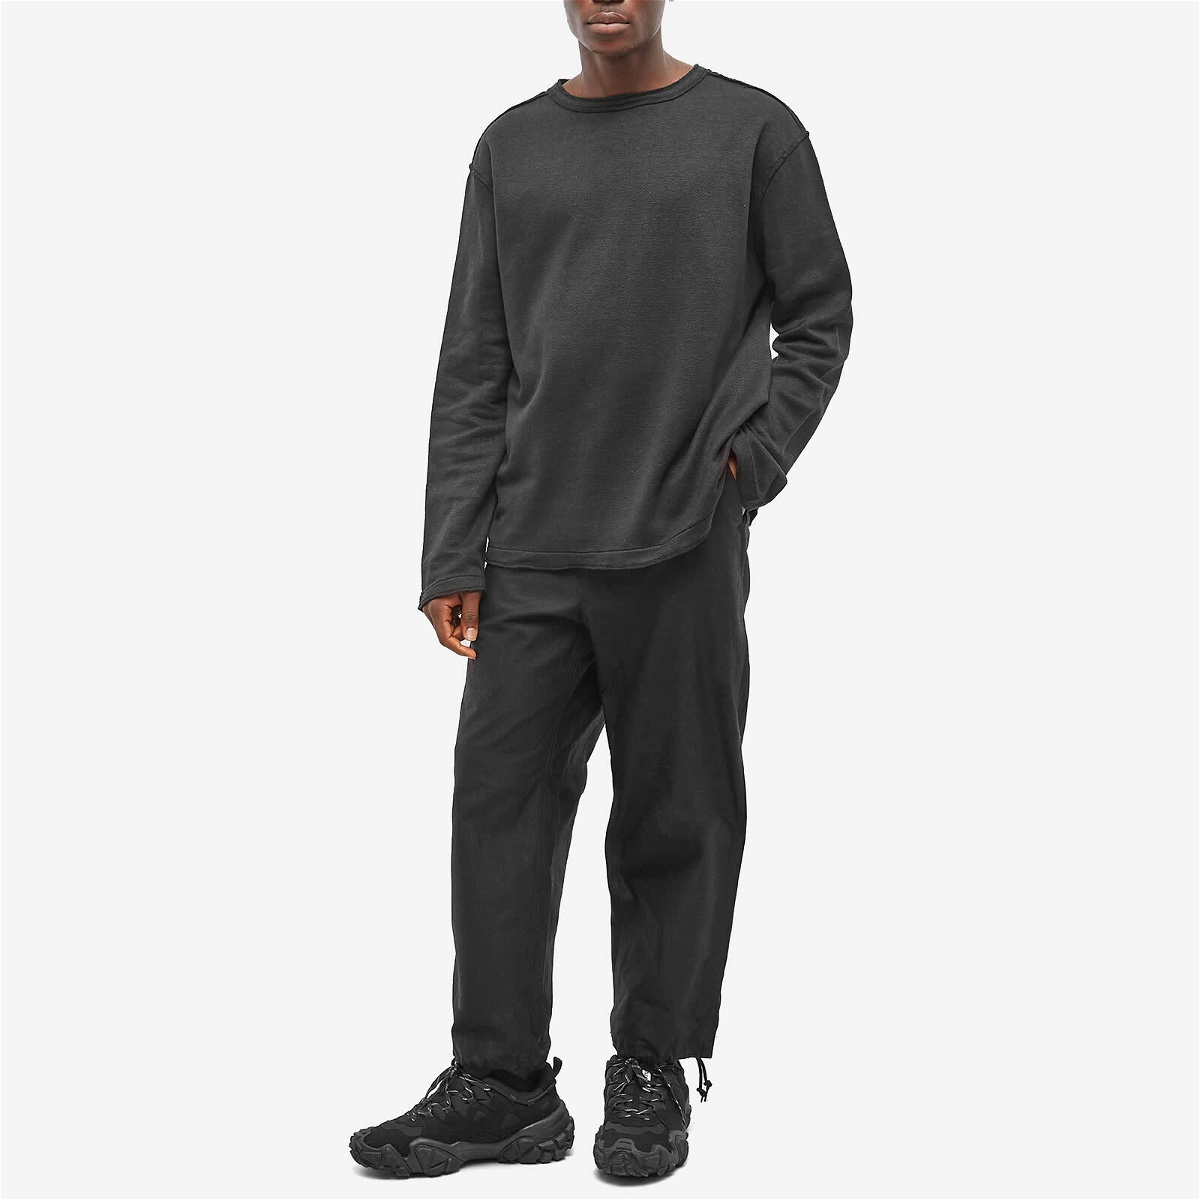 Our Legacy Men's Inverted Crew Sweat in Black Hemp Loopback Our Legacy